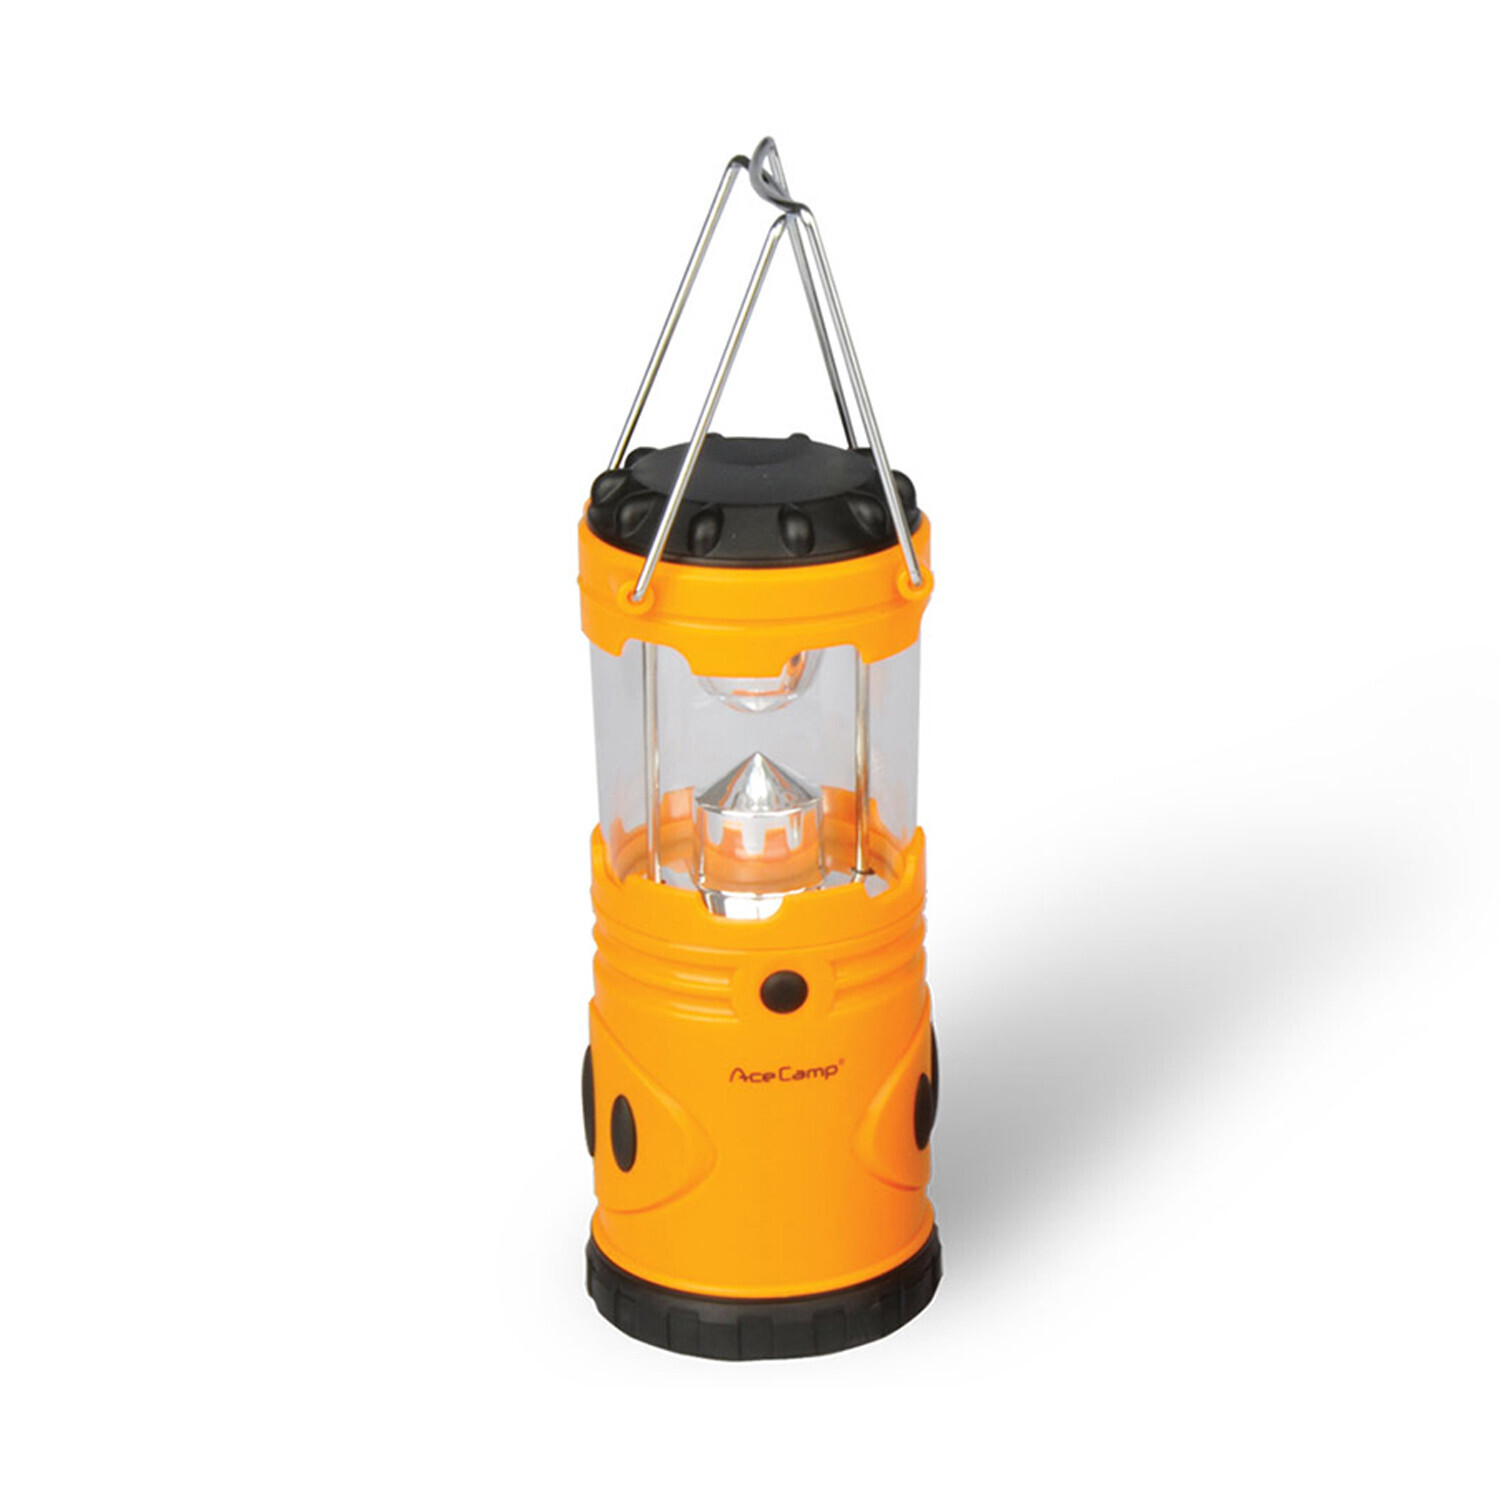 Acecamp portable camping light uses battery. Outdoor lantern SR1001